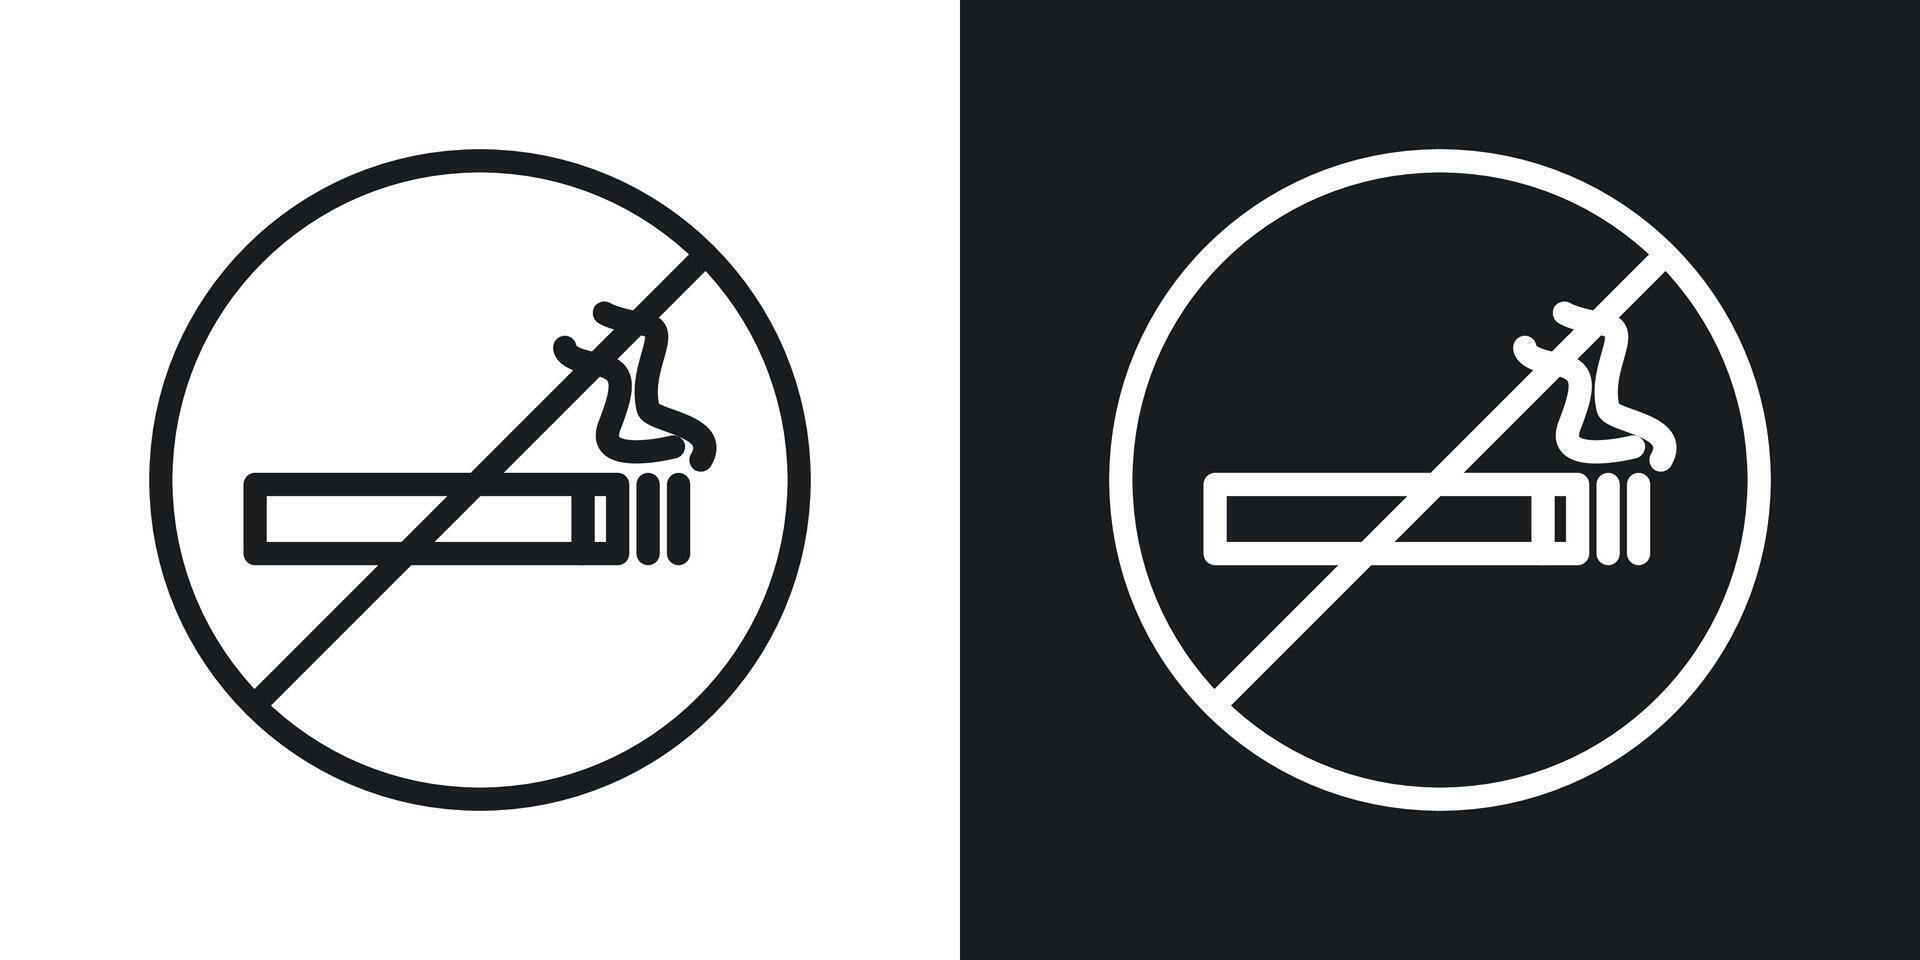 No smoking including electronic cigarettes sign vector